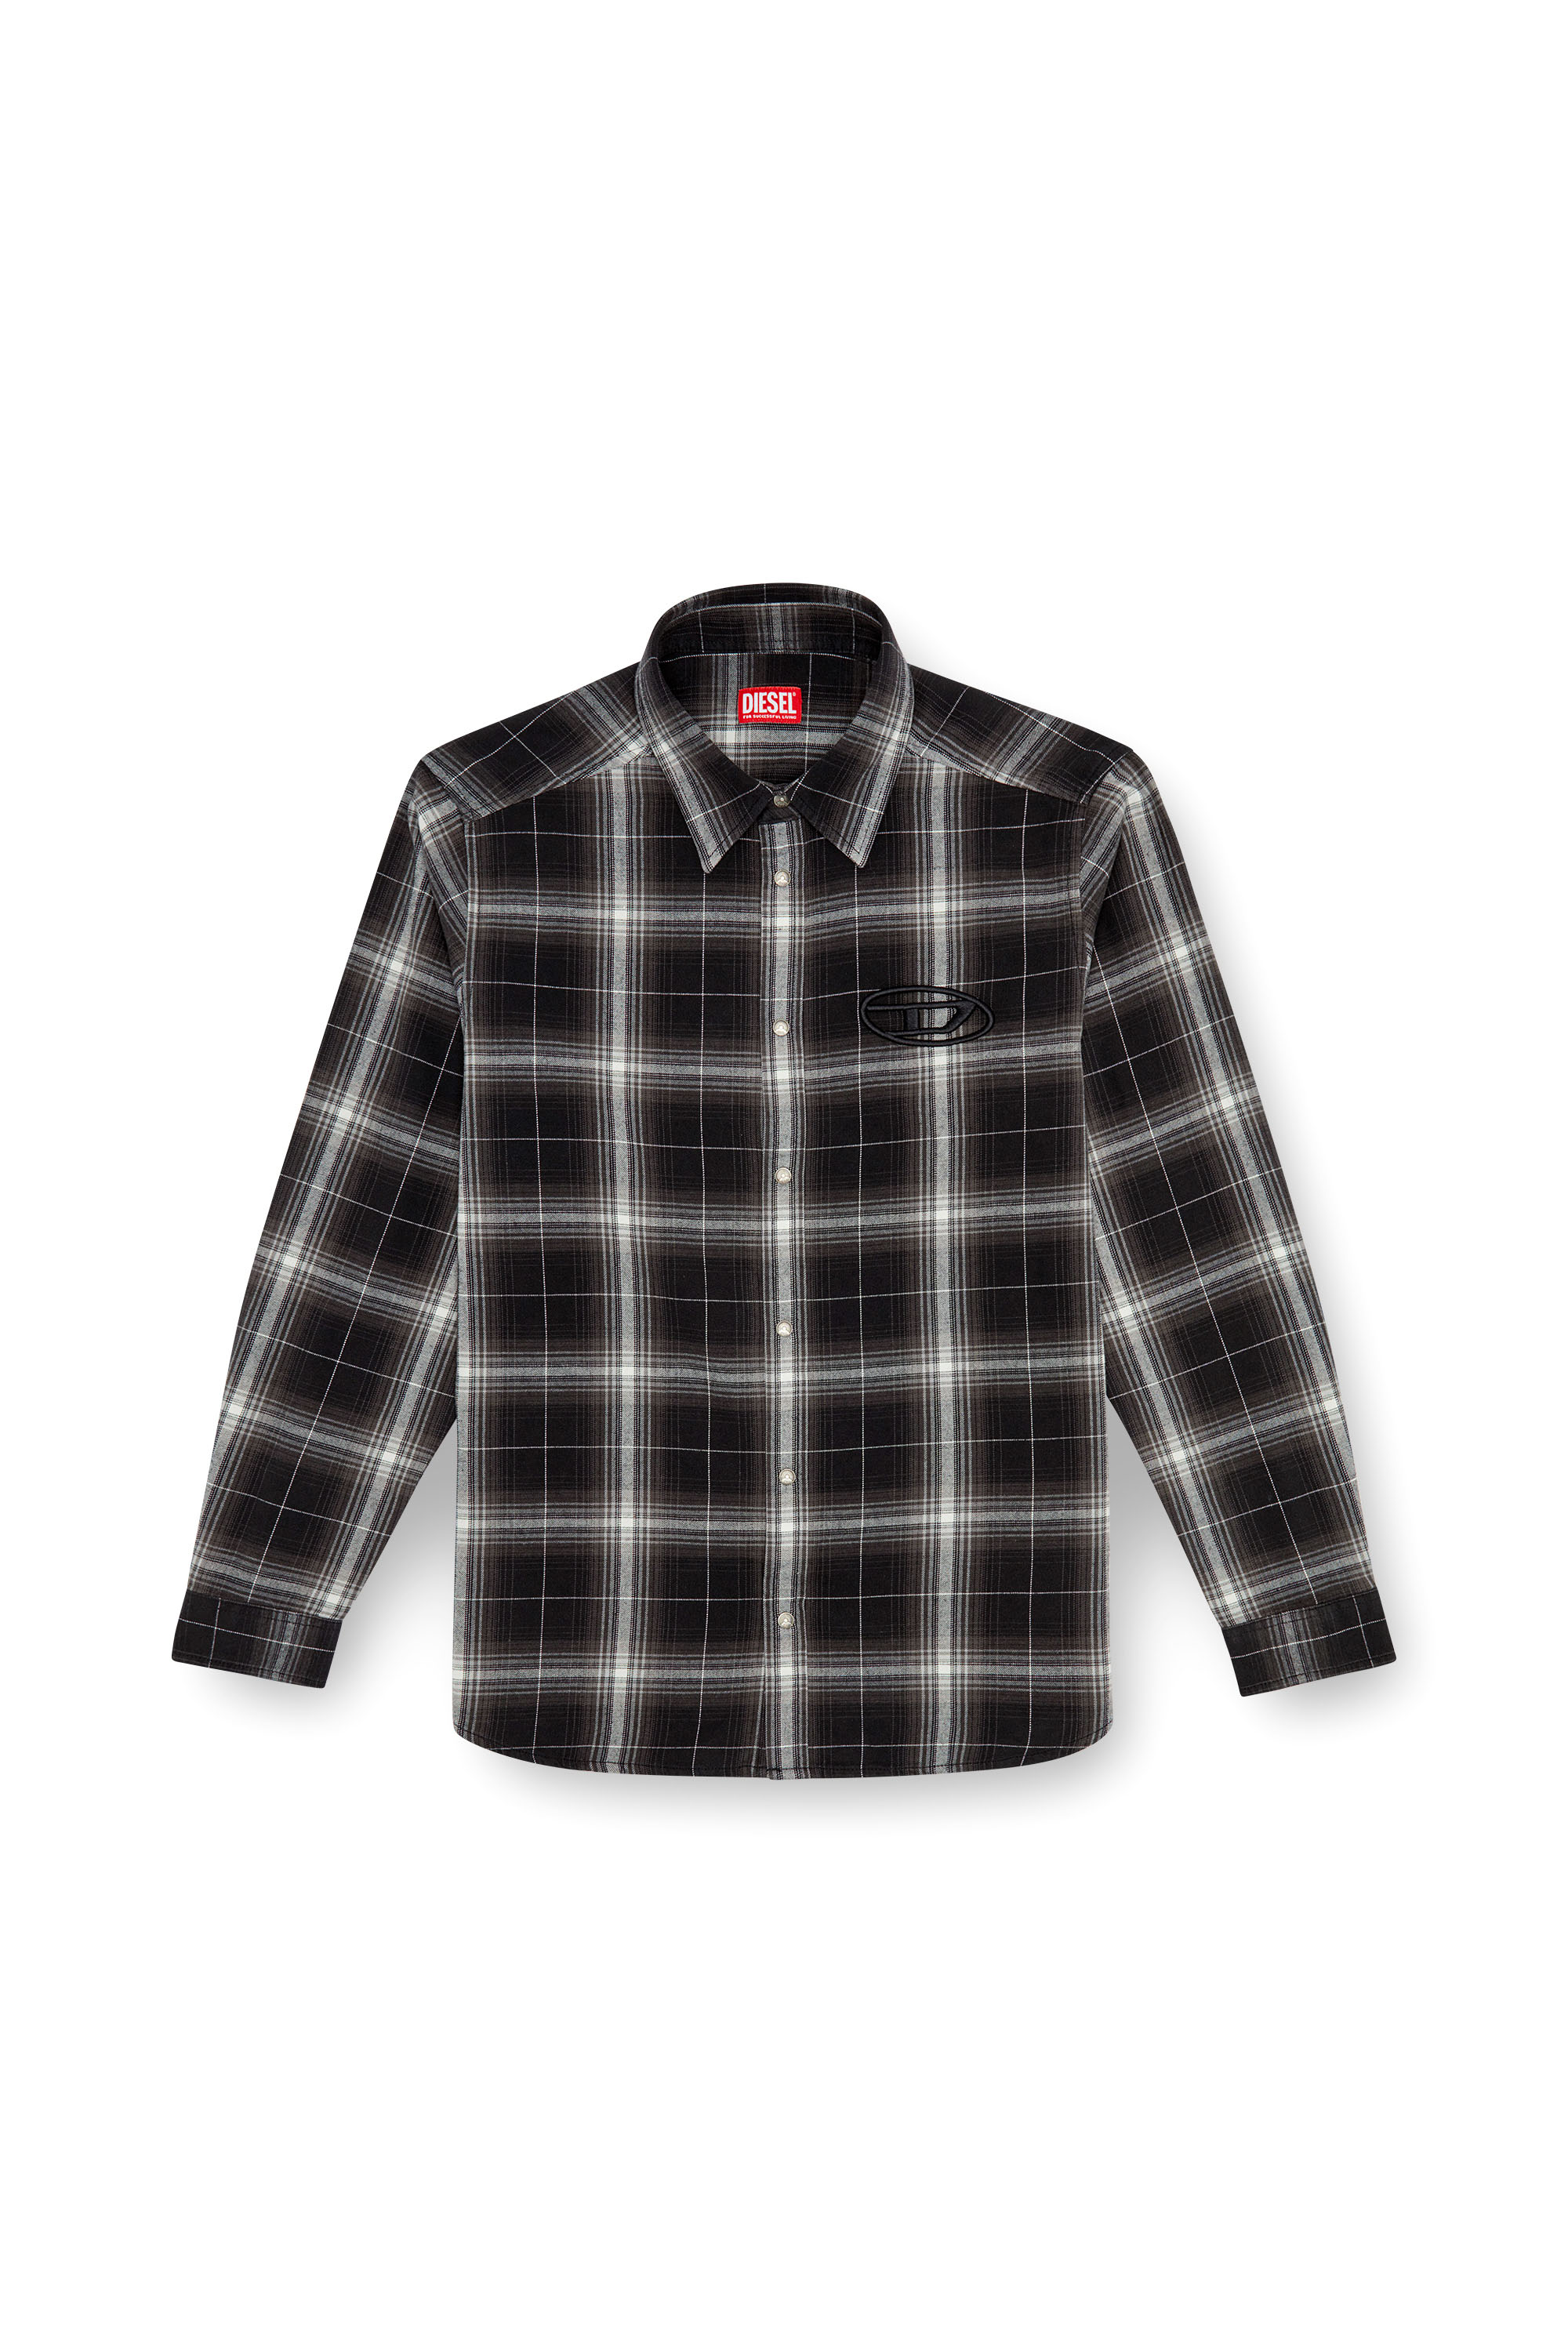 Diesel - S-SIMPLY-A, Man Check flannel shirt in Black - Image 5